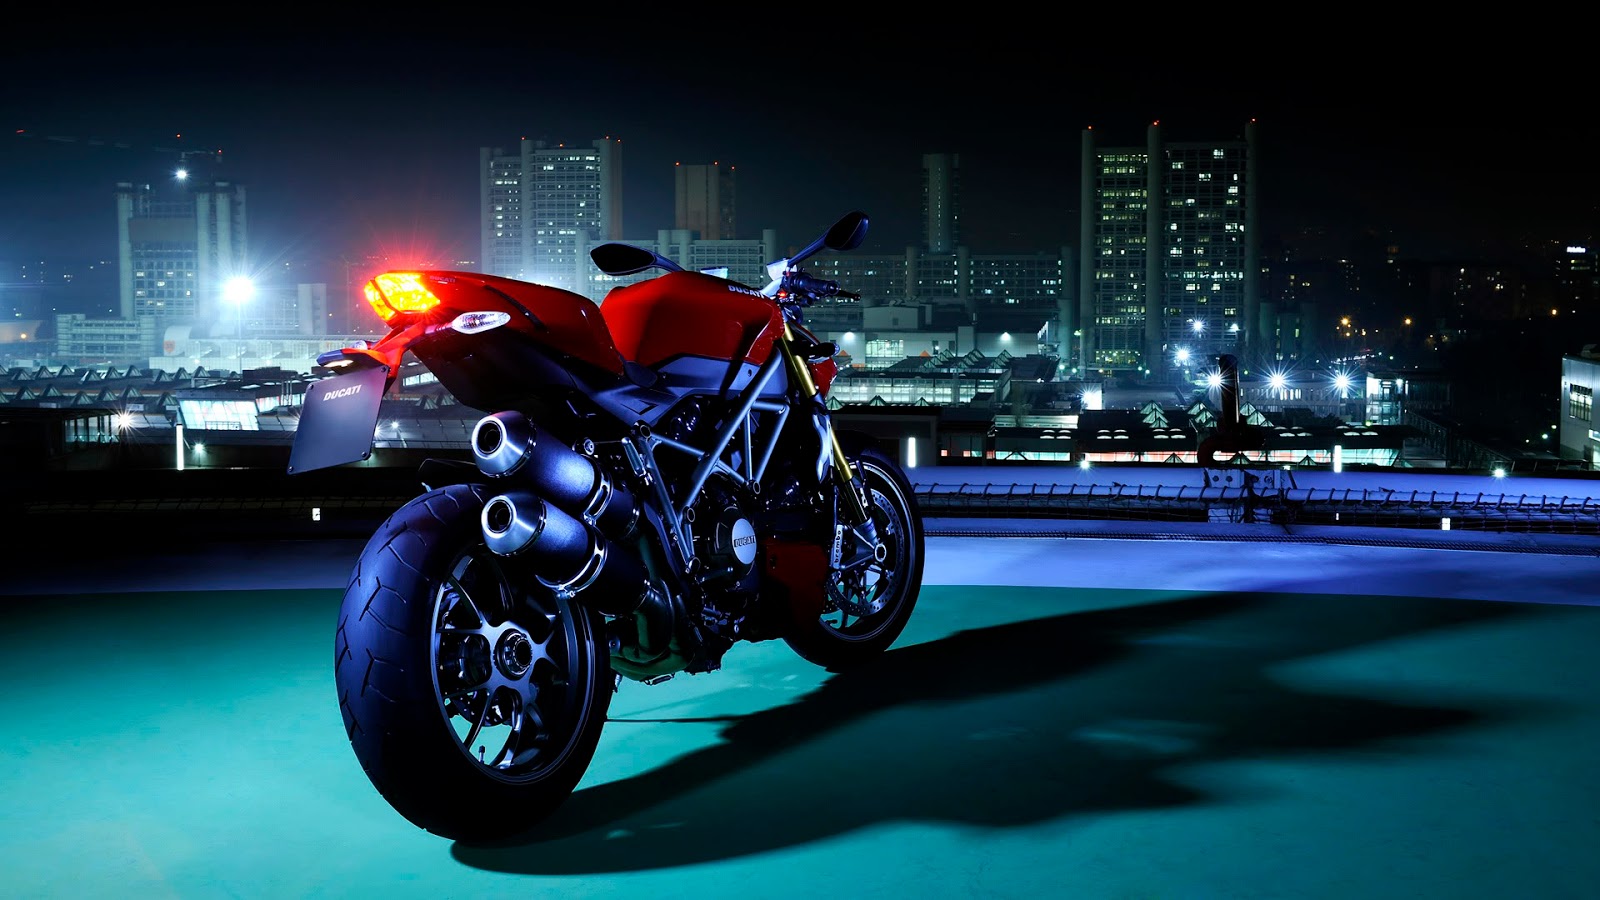 Free download New Full HD 1080p Ducati Wallpapers HD Desktop Backgrounds  Images [1600x900] for your Desktop, Mobile & Tablet | Explore 65+ Free Hd  Desktop Background | Hd Wallpapers 1920x1080 Free, Free